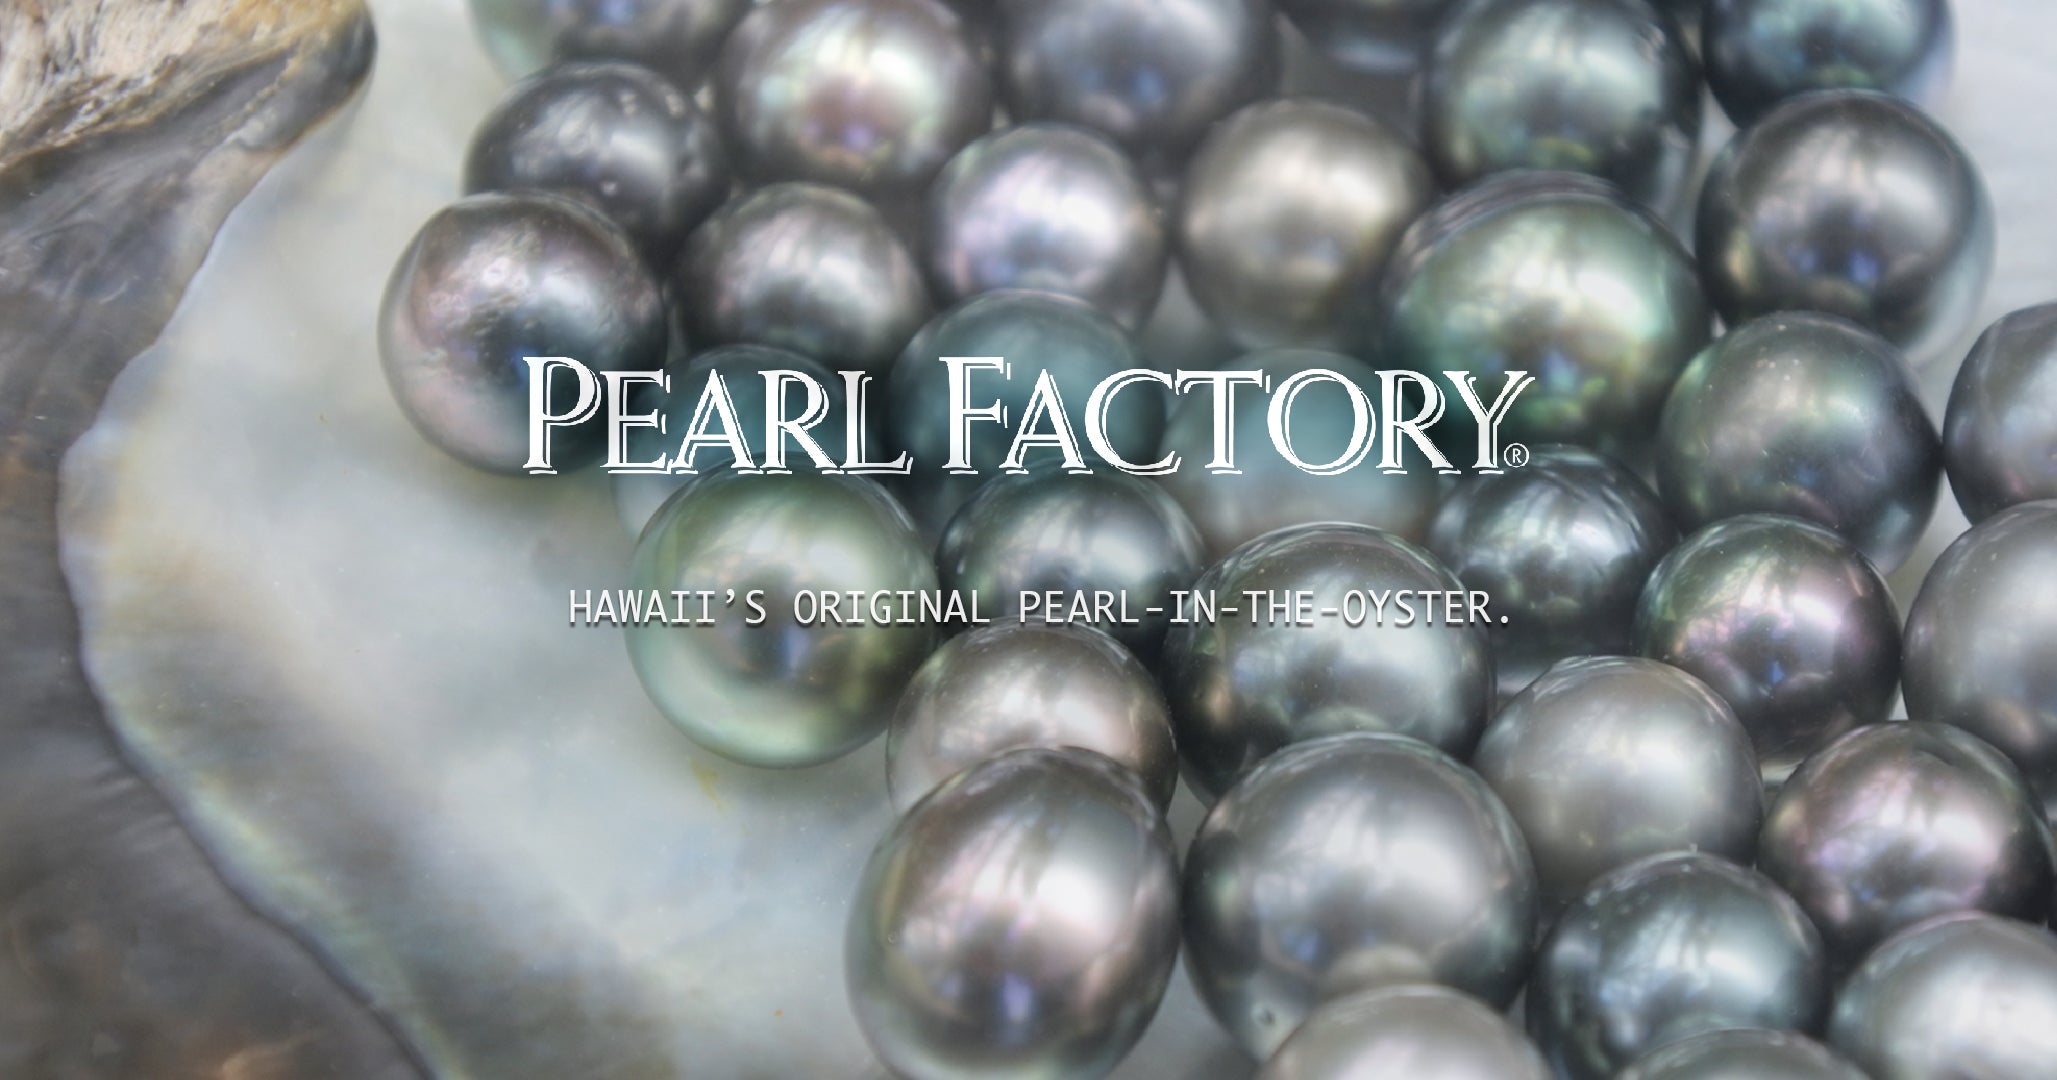 Pearl Factory - Hawaii's Original Pearl-In-The-Oyster 